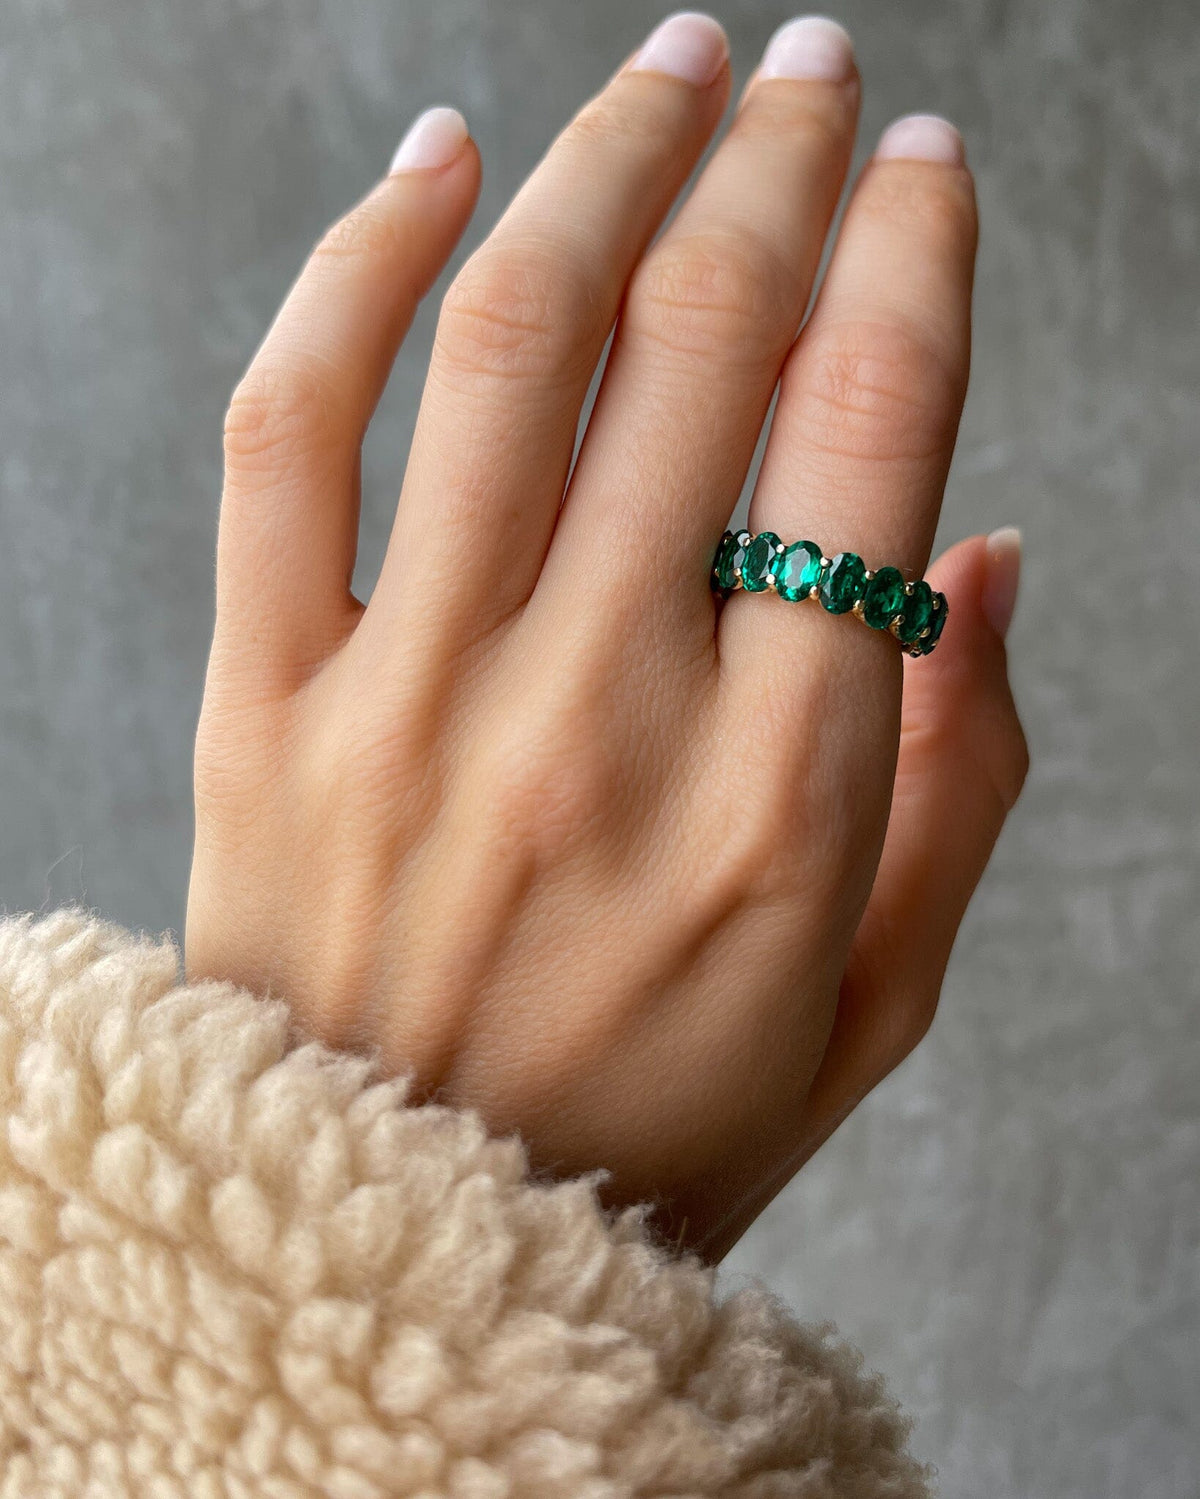 Buy Emerald Ring Vintage, Green Ring Women, Green Cocktail Rings for Women,  Oversized Stone Ring, Green Stone Ring,silver Chunky Rings Women Online in  India - Etsy